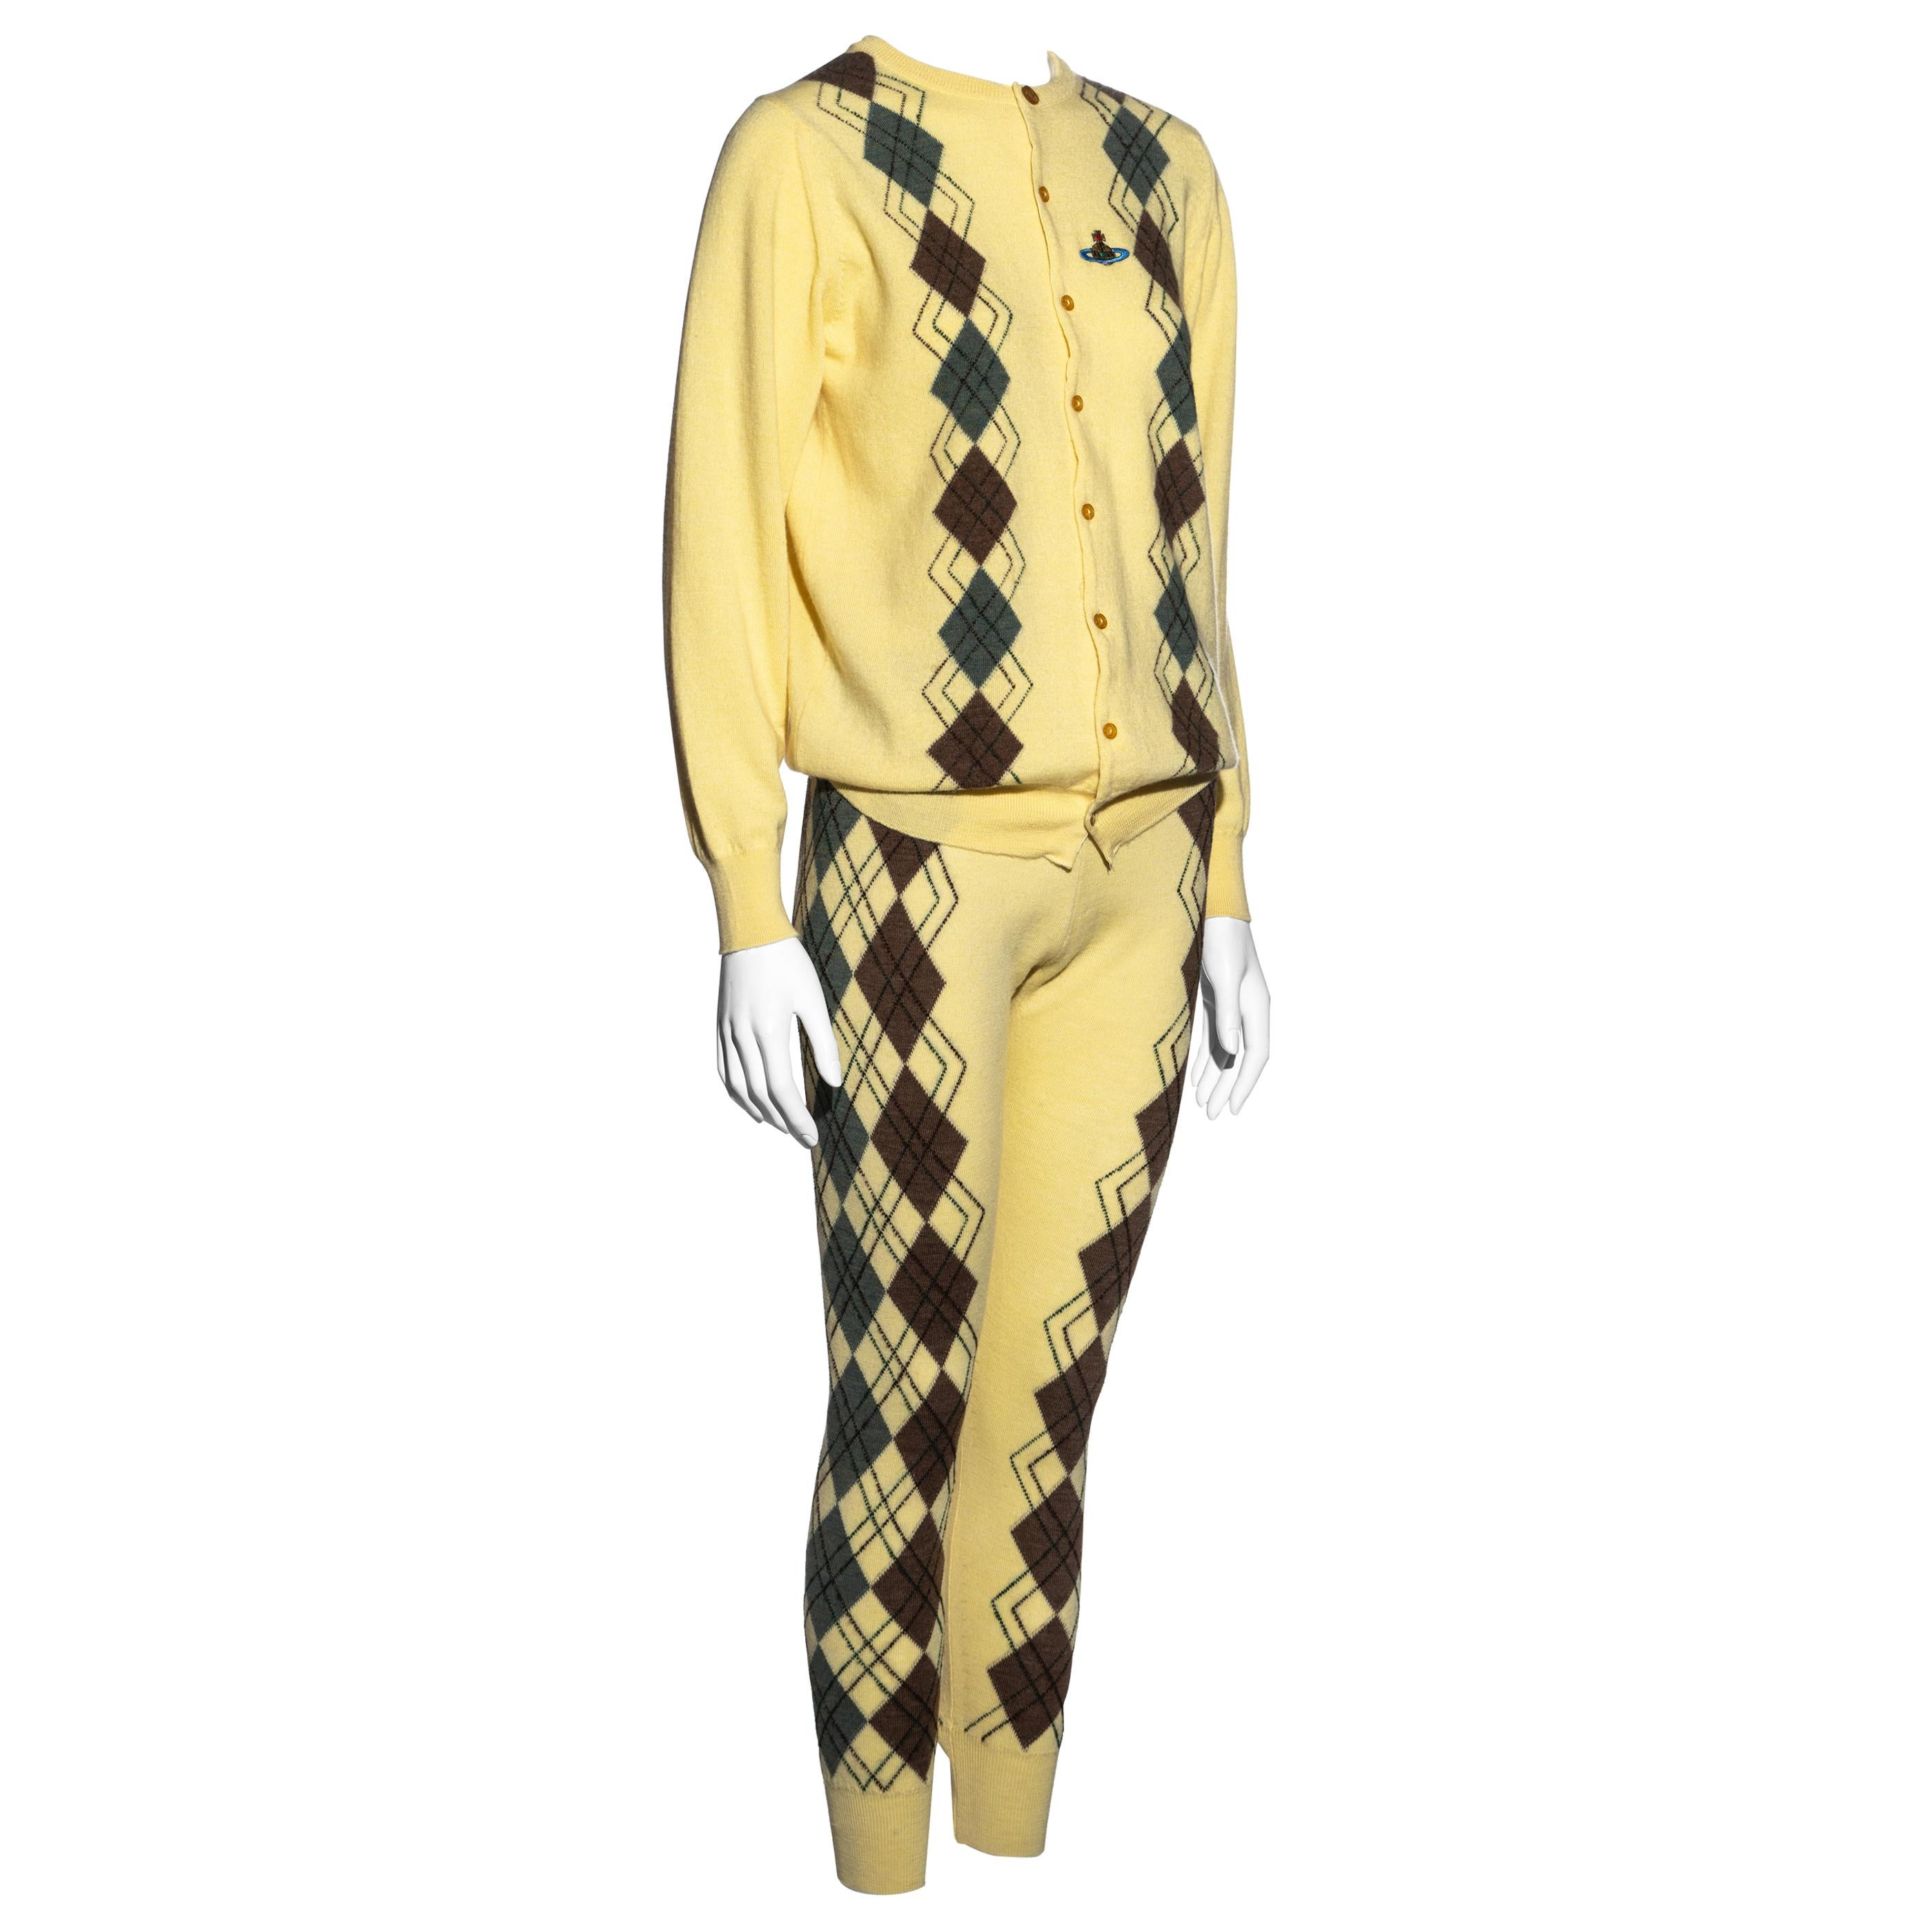 Vivienne Westwood yellow argyle knitted leggings and cardigan set, fw 1989